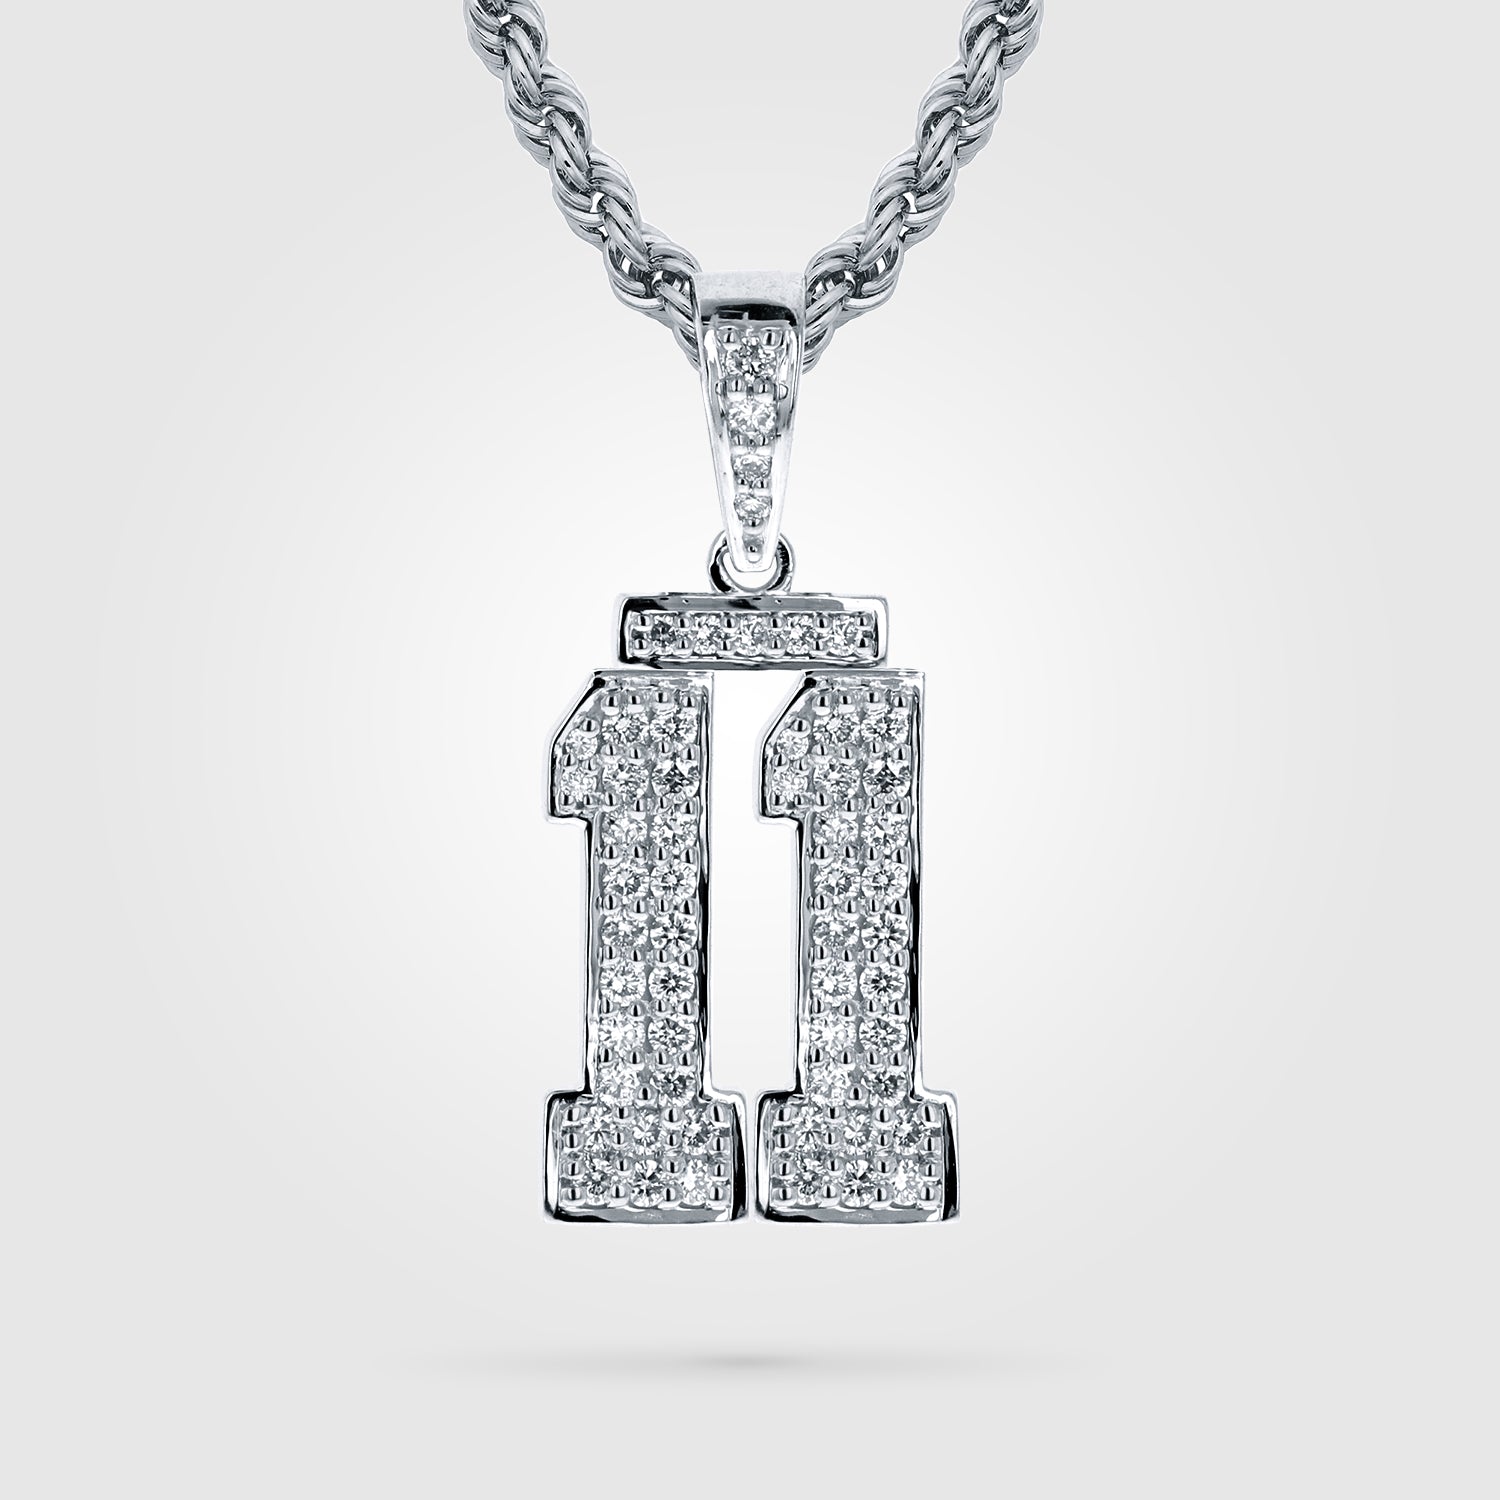 Diamond Jersey Number Necklace | White Gold Double Digit Diamond Studded Jersey Number Necklace